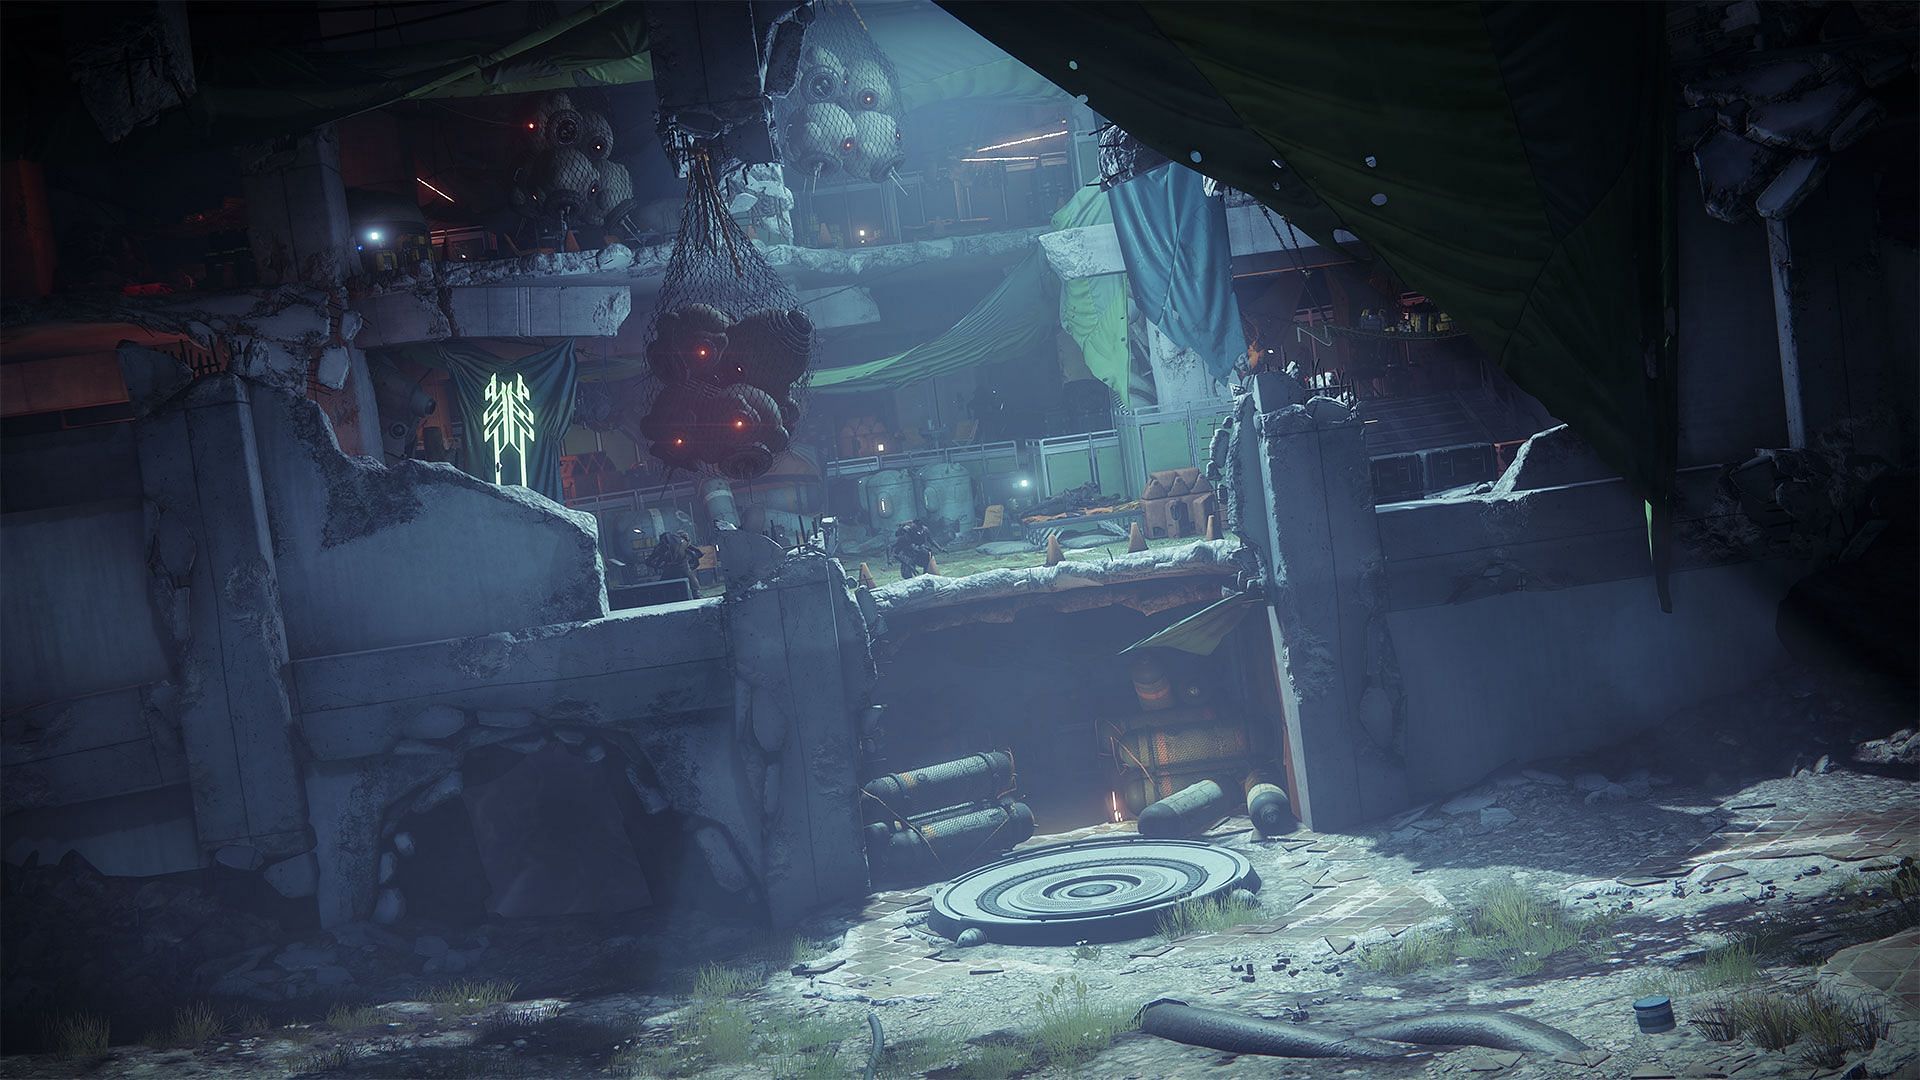 The Eliksni Quarters were first added in the Season of the Splicer and has turned into an important location in Season of Plunder (Image via Bungie)